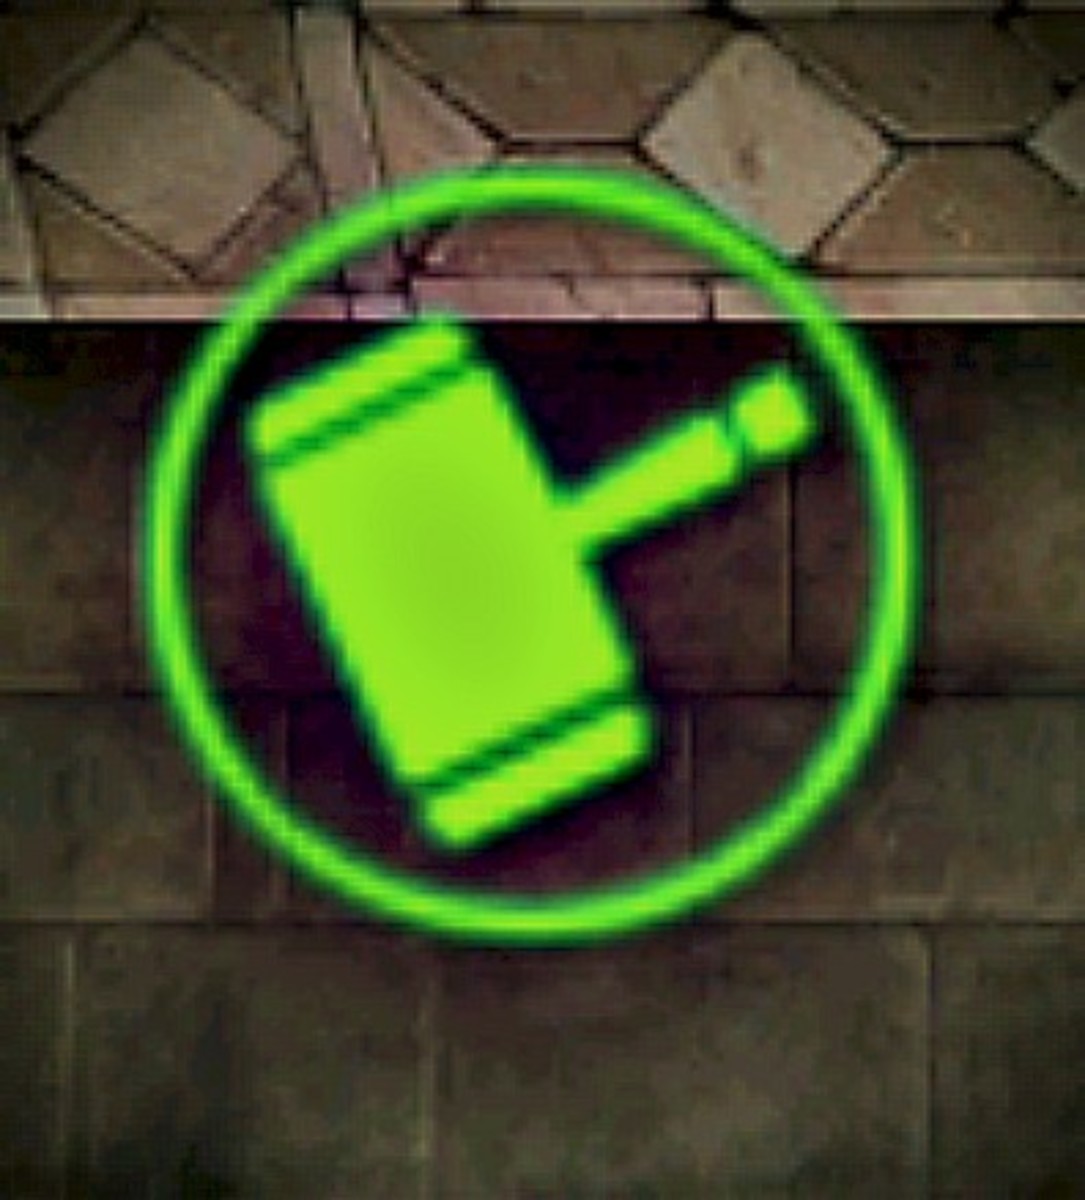 This is the auction house icon. "Order and Chaos" auctioneers have this gavel icon over their heads.